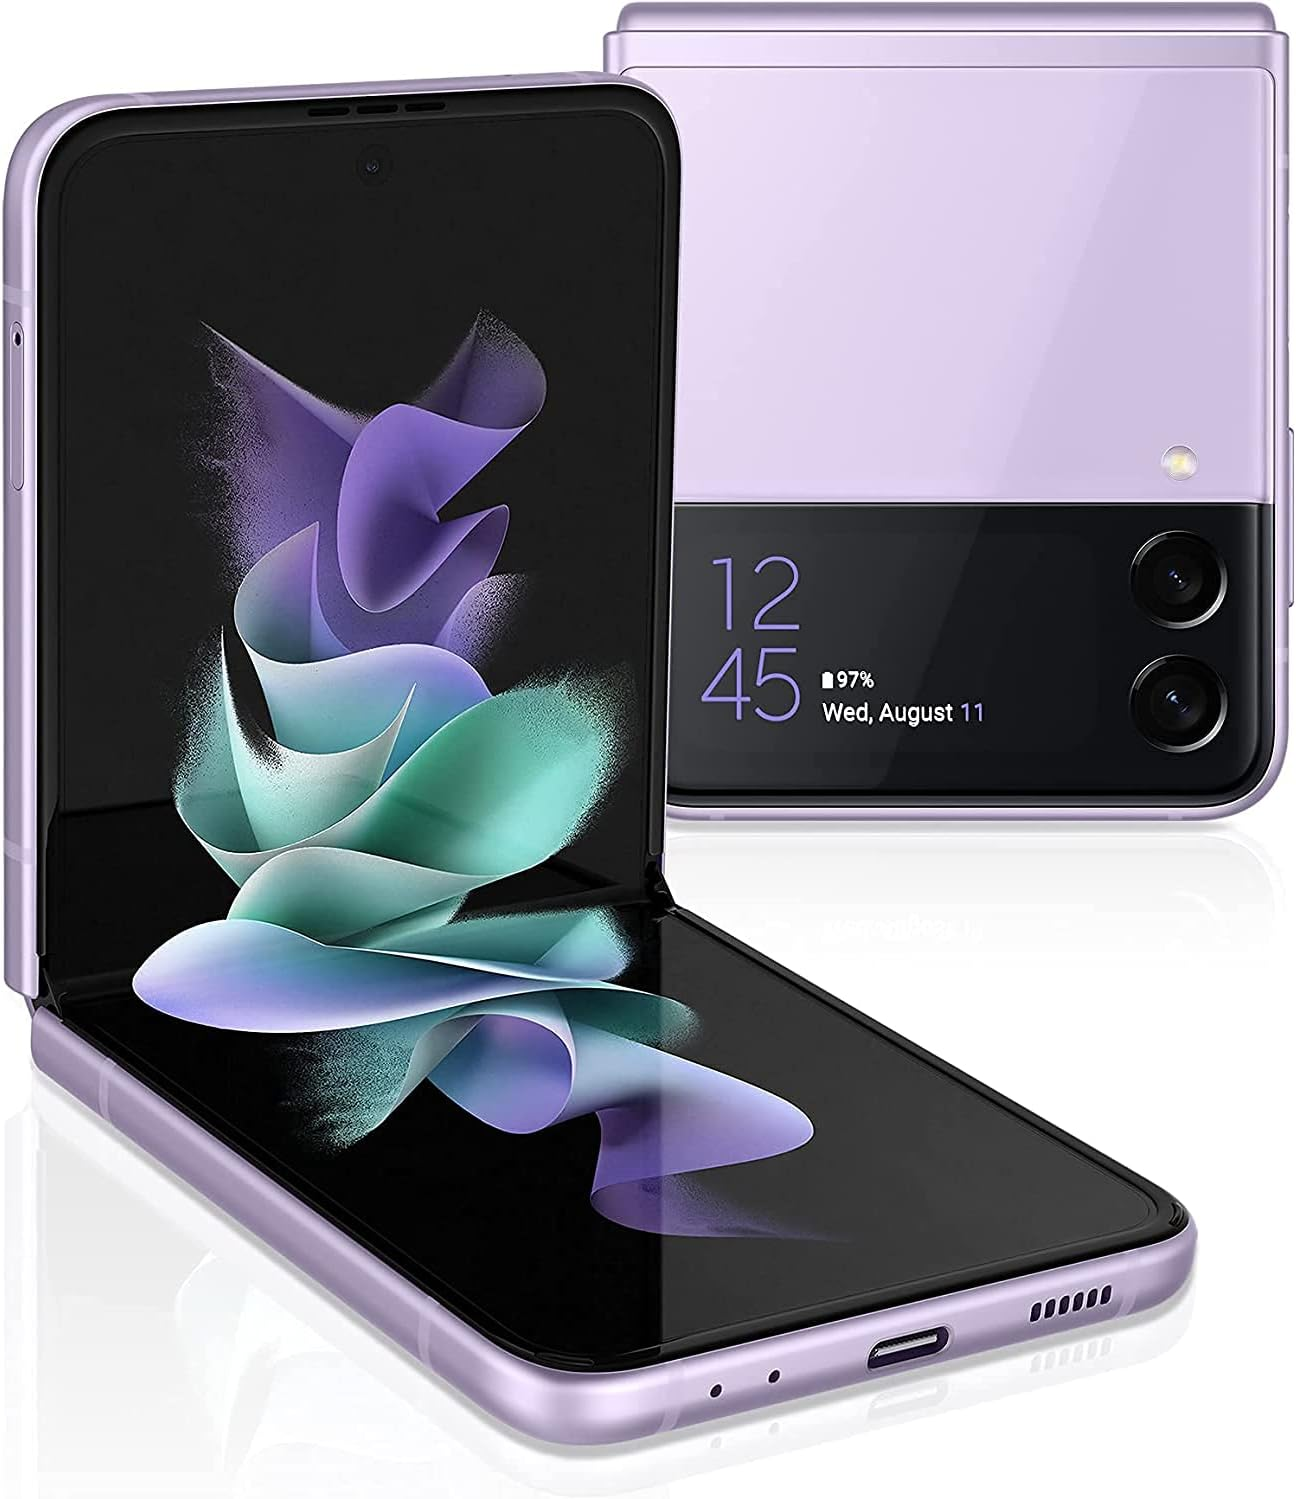 Samsung Galaxy Z Flip 3 5G T-Mobile Locked Android Cell Phone US Version Smartphone Flex Mode Intuitive Camera Compact 128GB (Renewed) (Lavender) at Amazon.com $274